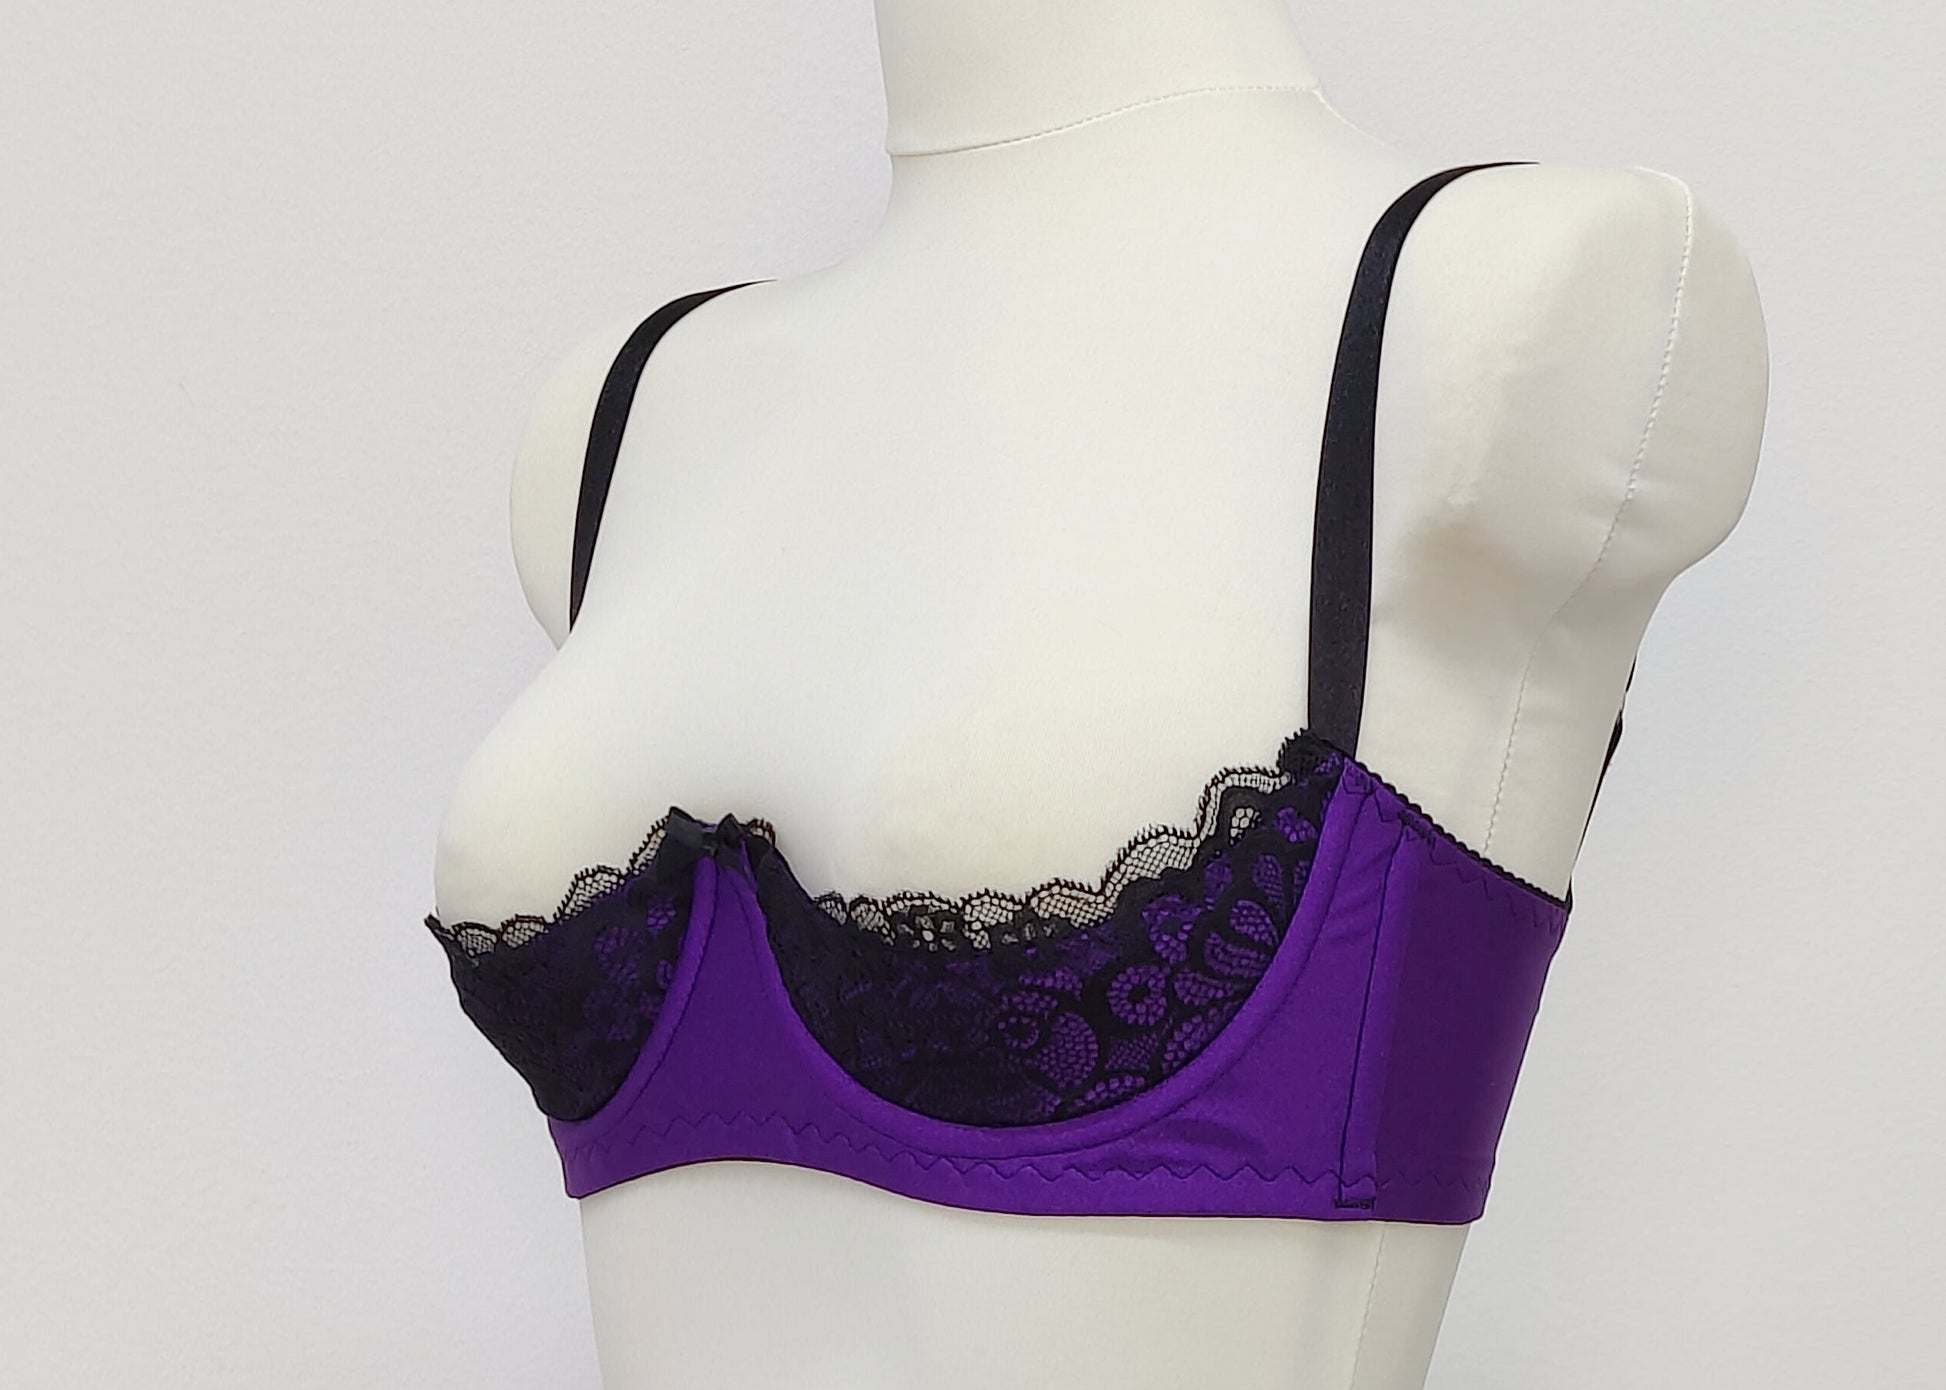 Purple LUCY Quarter cup bra with black lace and straps, size US 34C or EU 70C